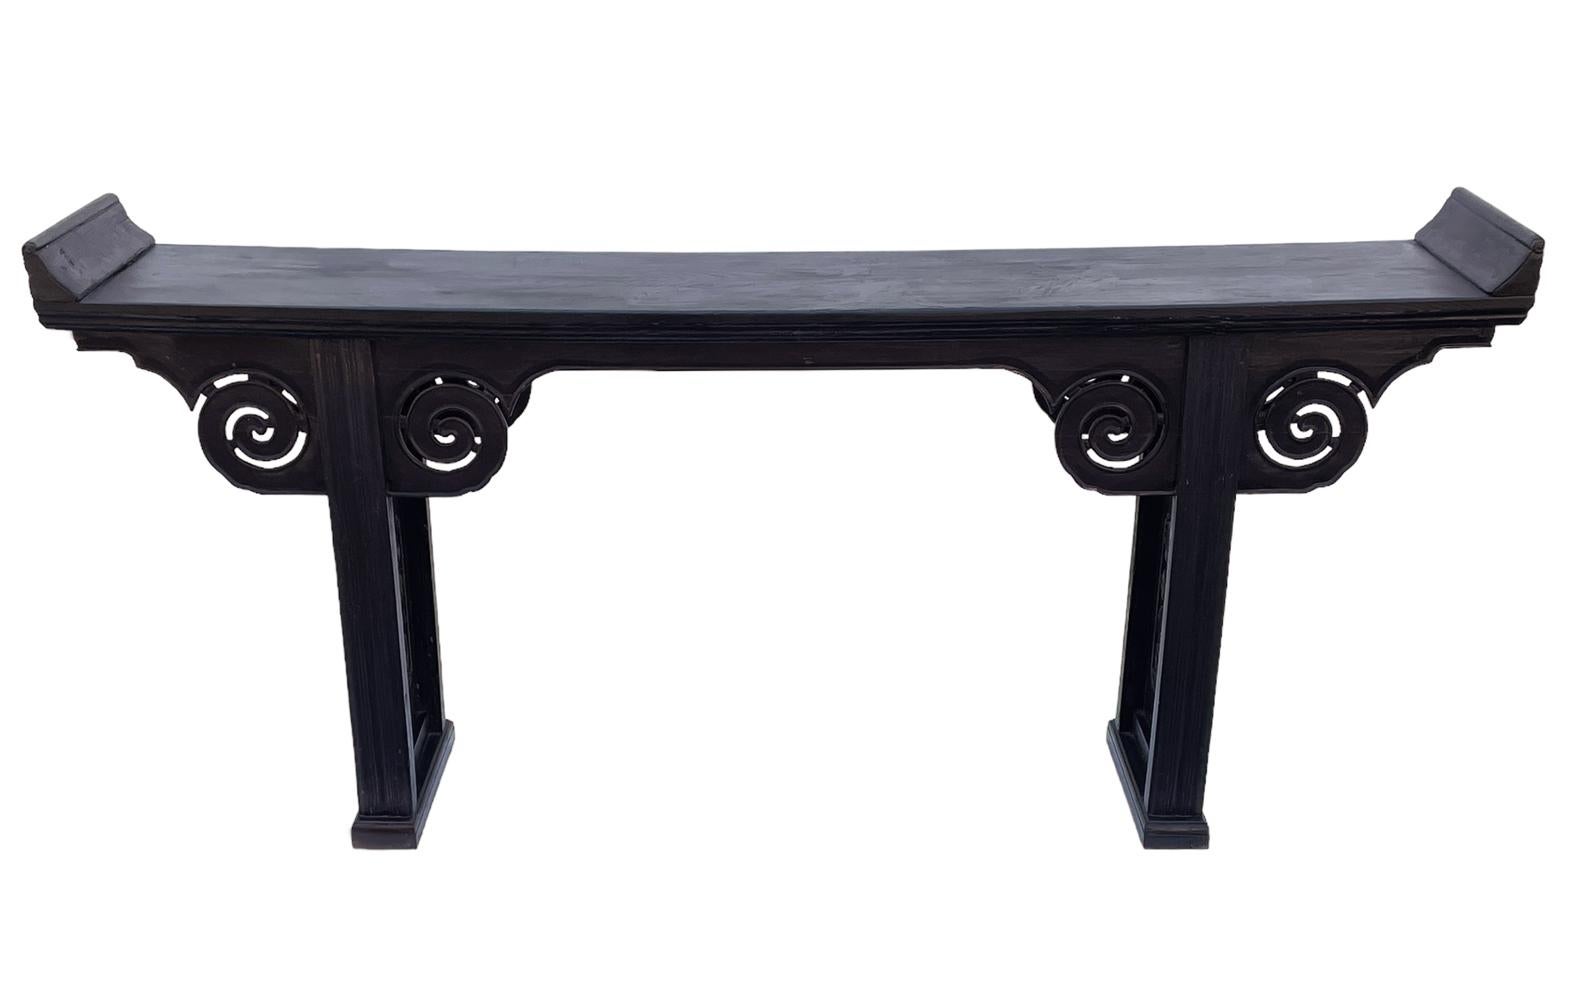 Early turn of the century alter table from a south Asian Temple. Heavy solid wood with nice heavy patina in a warm dark brown color. Sure to be an interesting highlight in your space. 